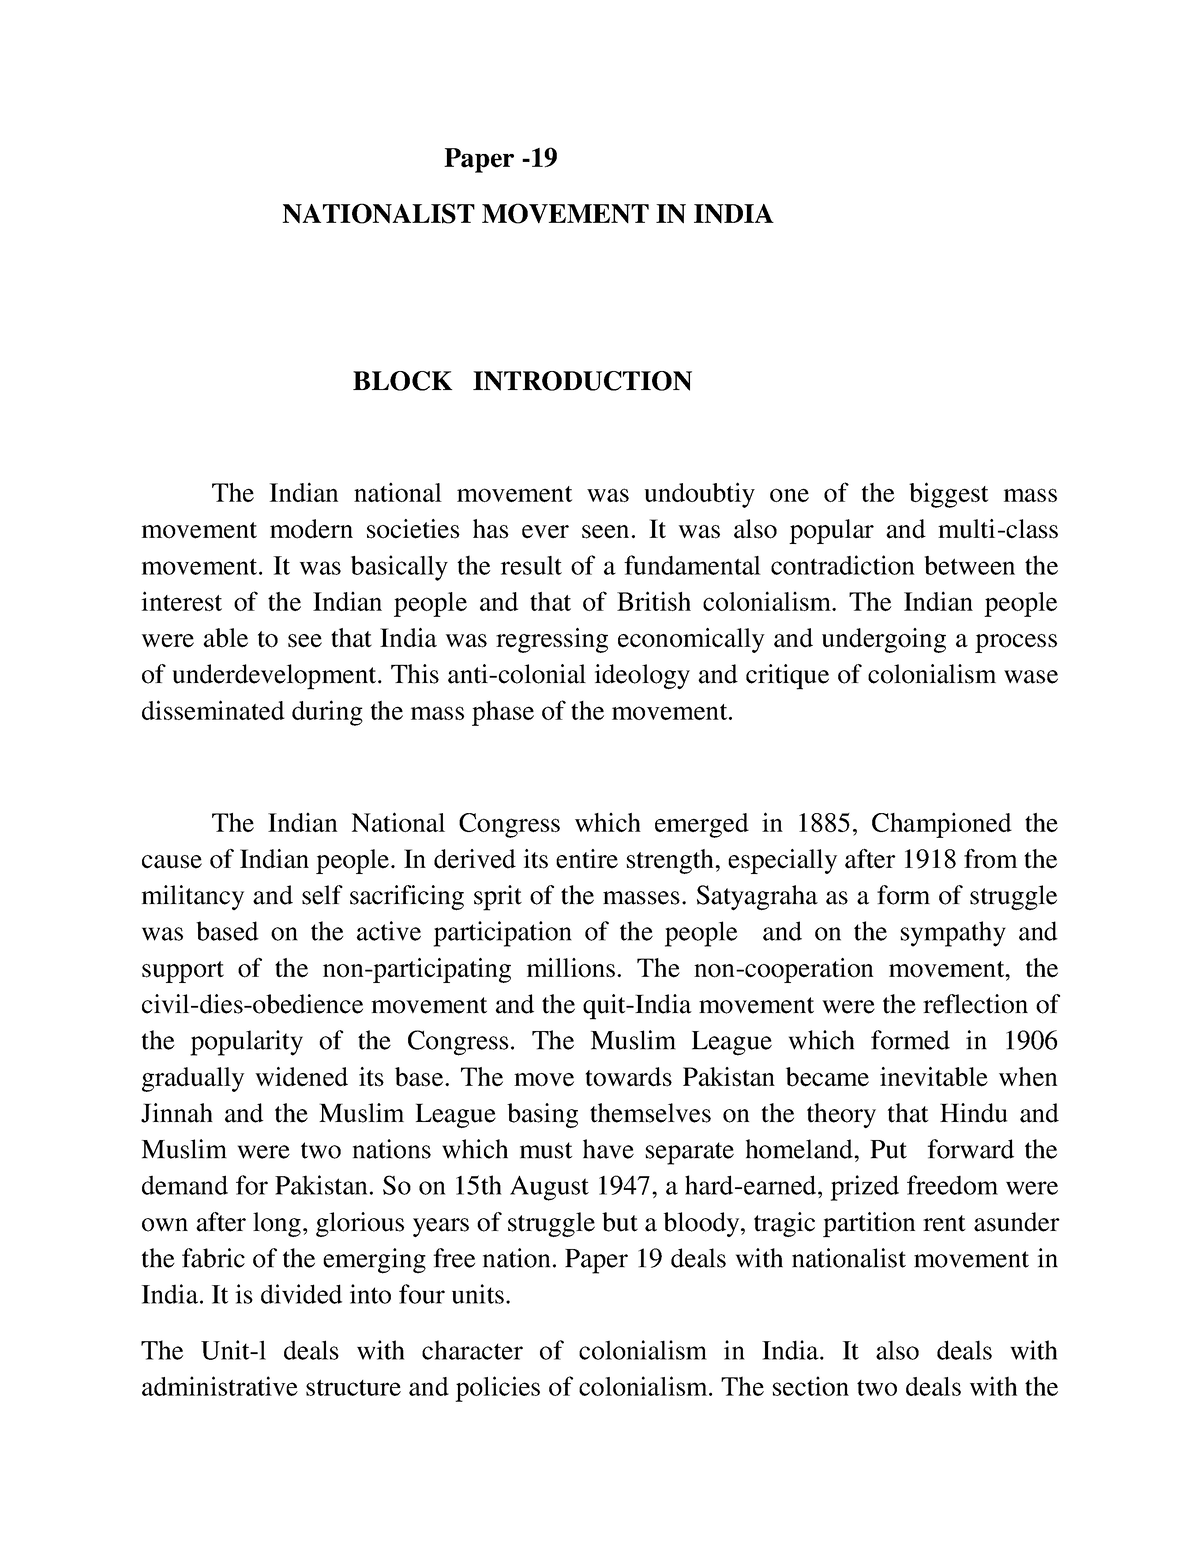 indian national movement essay